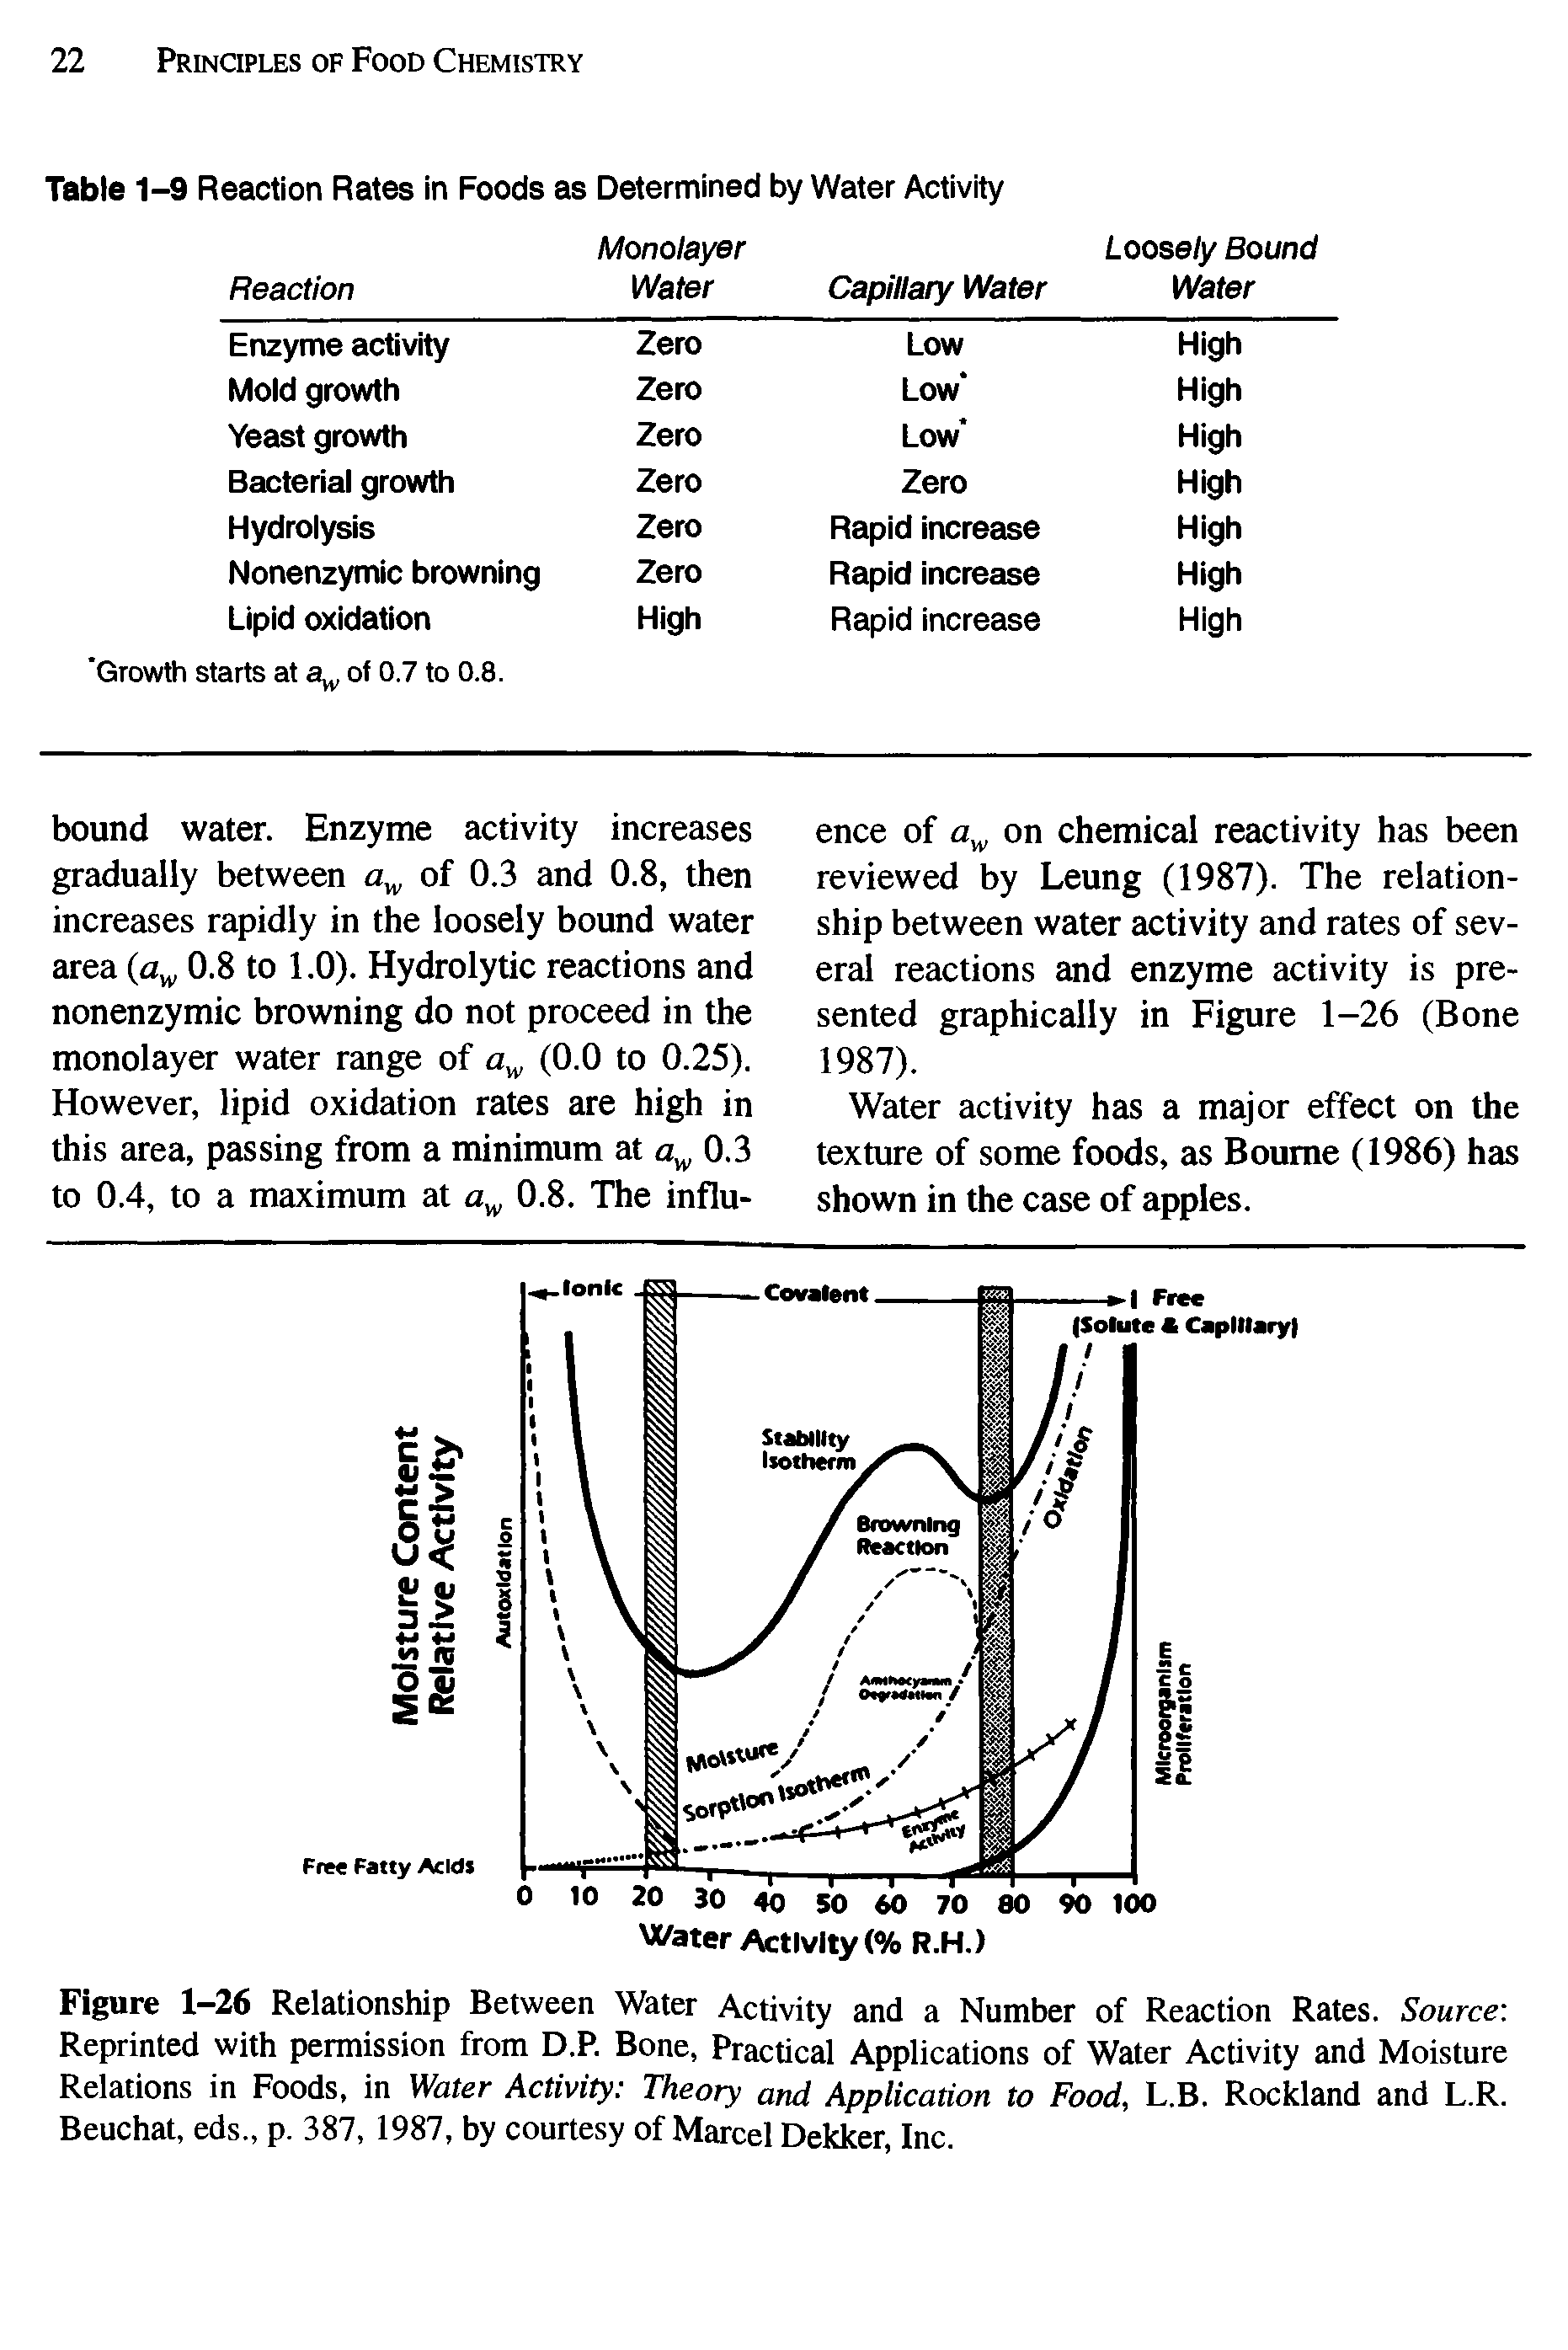 Figure 1-26 Relationship Between Water Activity and a Number of Reaction Rates. Source Reprinted with permission from D.P. Bone, Practical Applications of Water Activity and Moisture Relations in Foods, in Water Activity Theory and Application to Food, L.B. Rockland and L.R. Beuchat, eds., p. 387, 1987, by courtesy of Marcel Dekker, Inc.